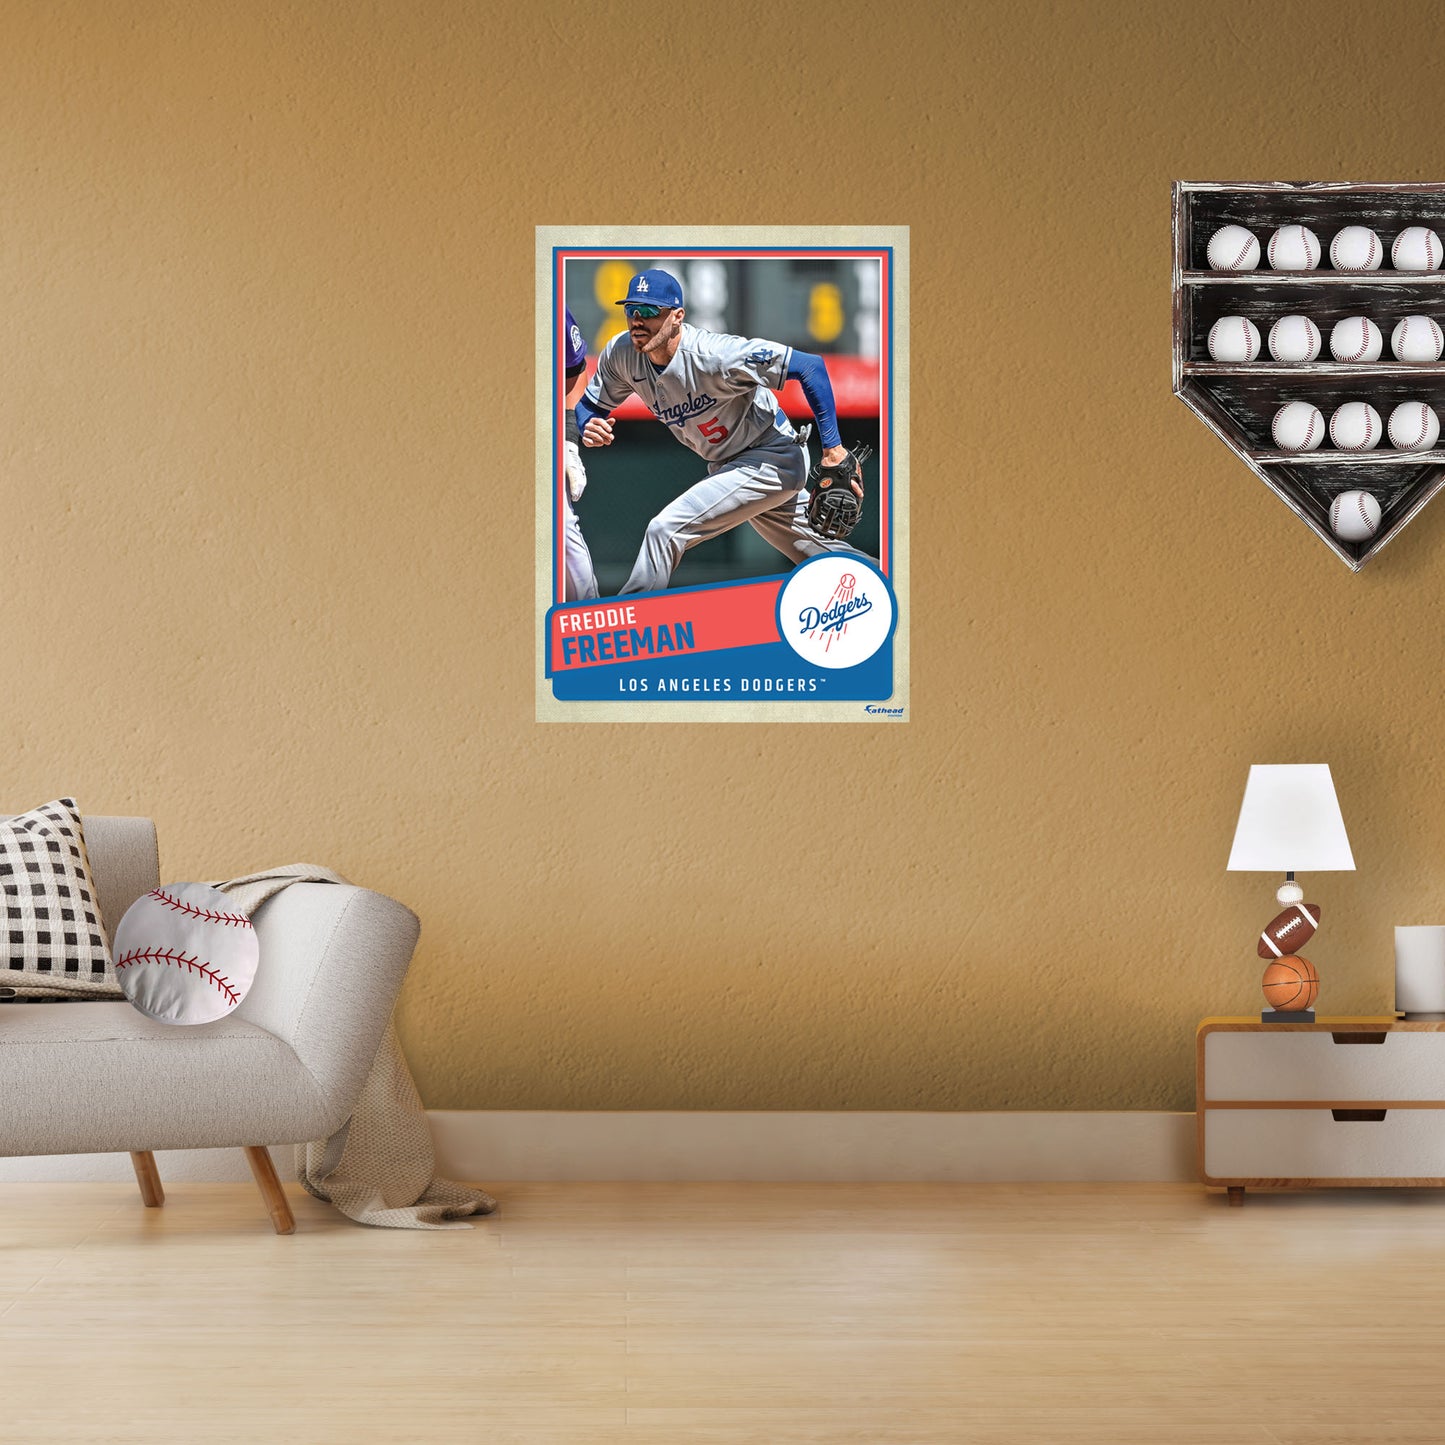 Los Angeles Dodgers: Freddie Freeman  Poster        - Officially Licensed MLB Removable     Adhesive Decal